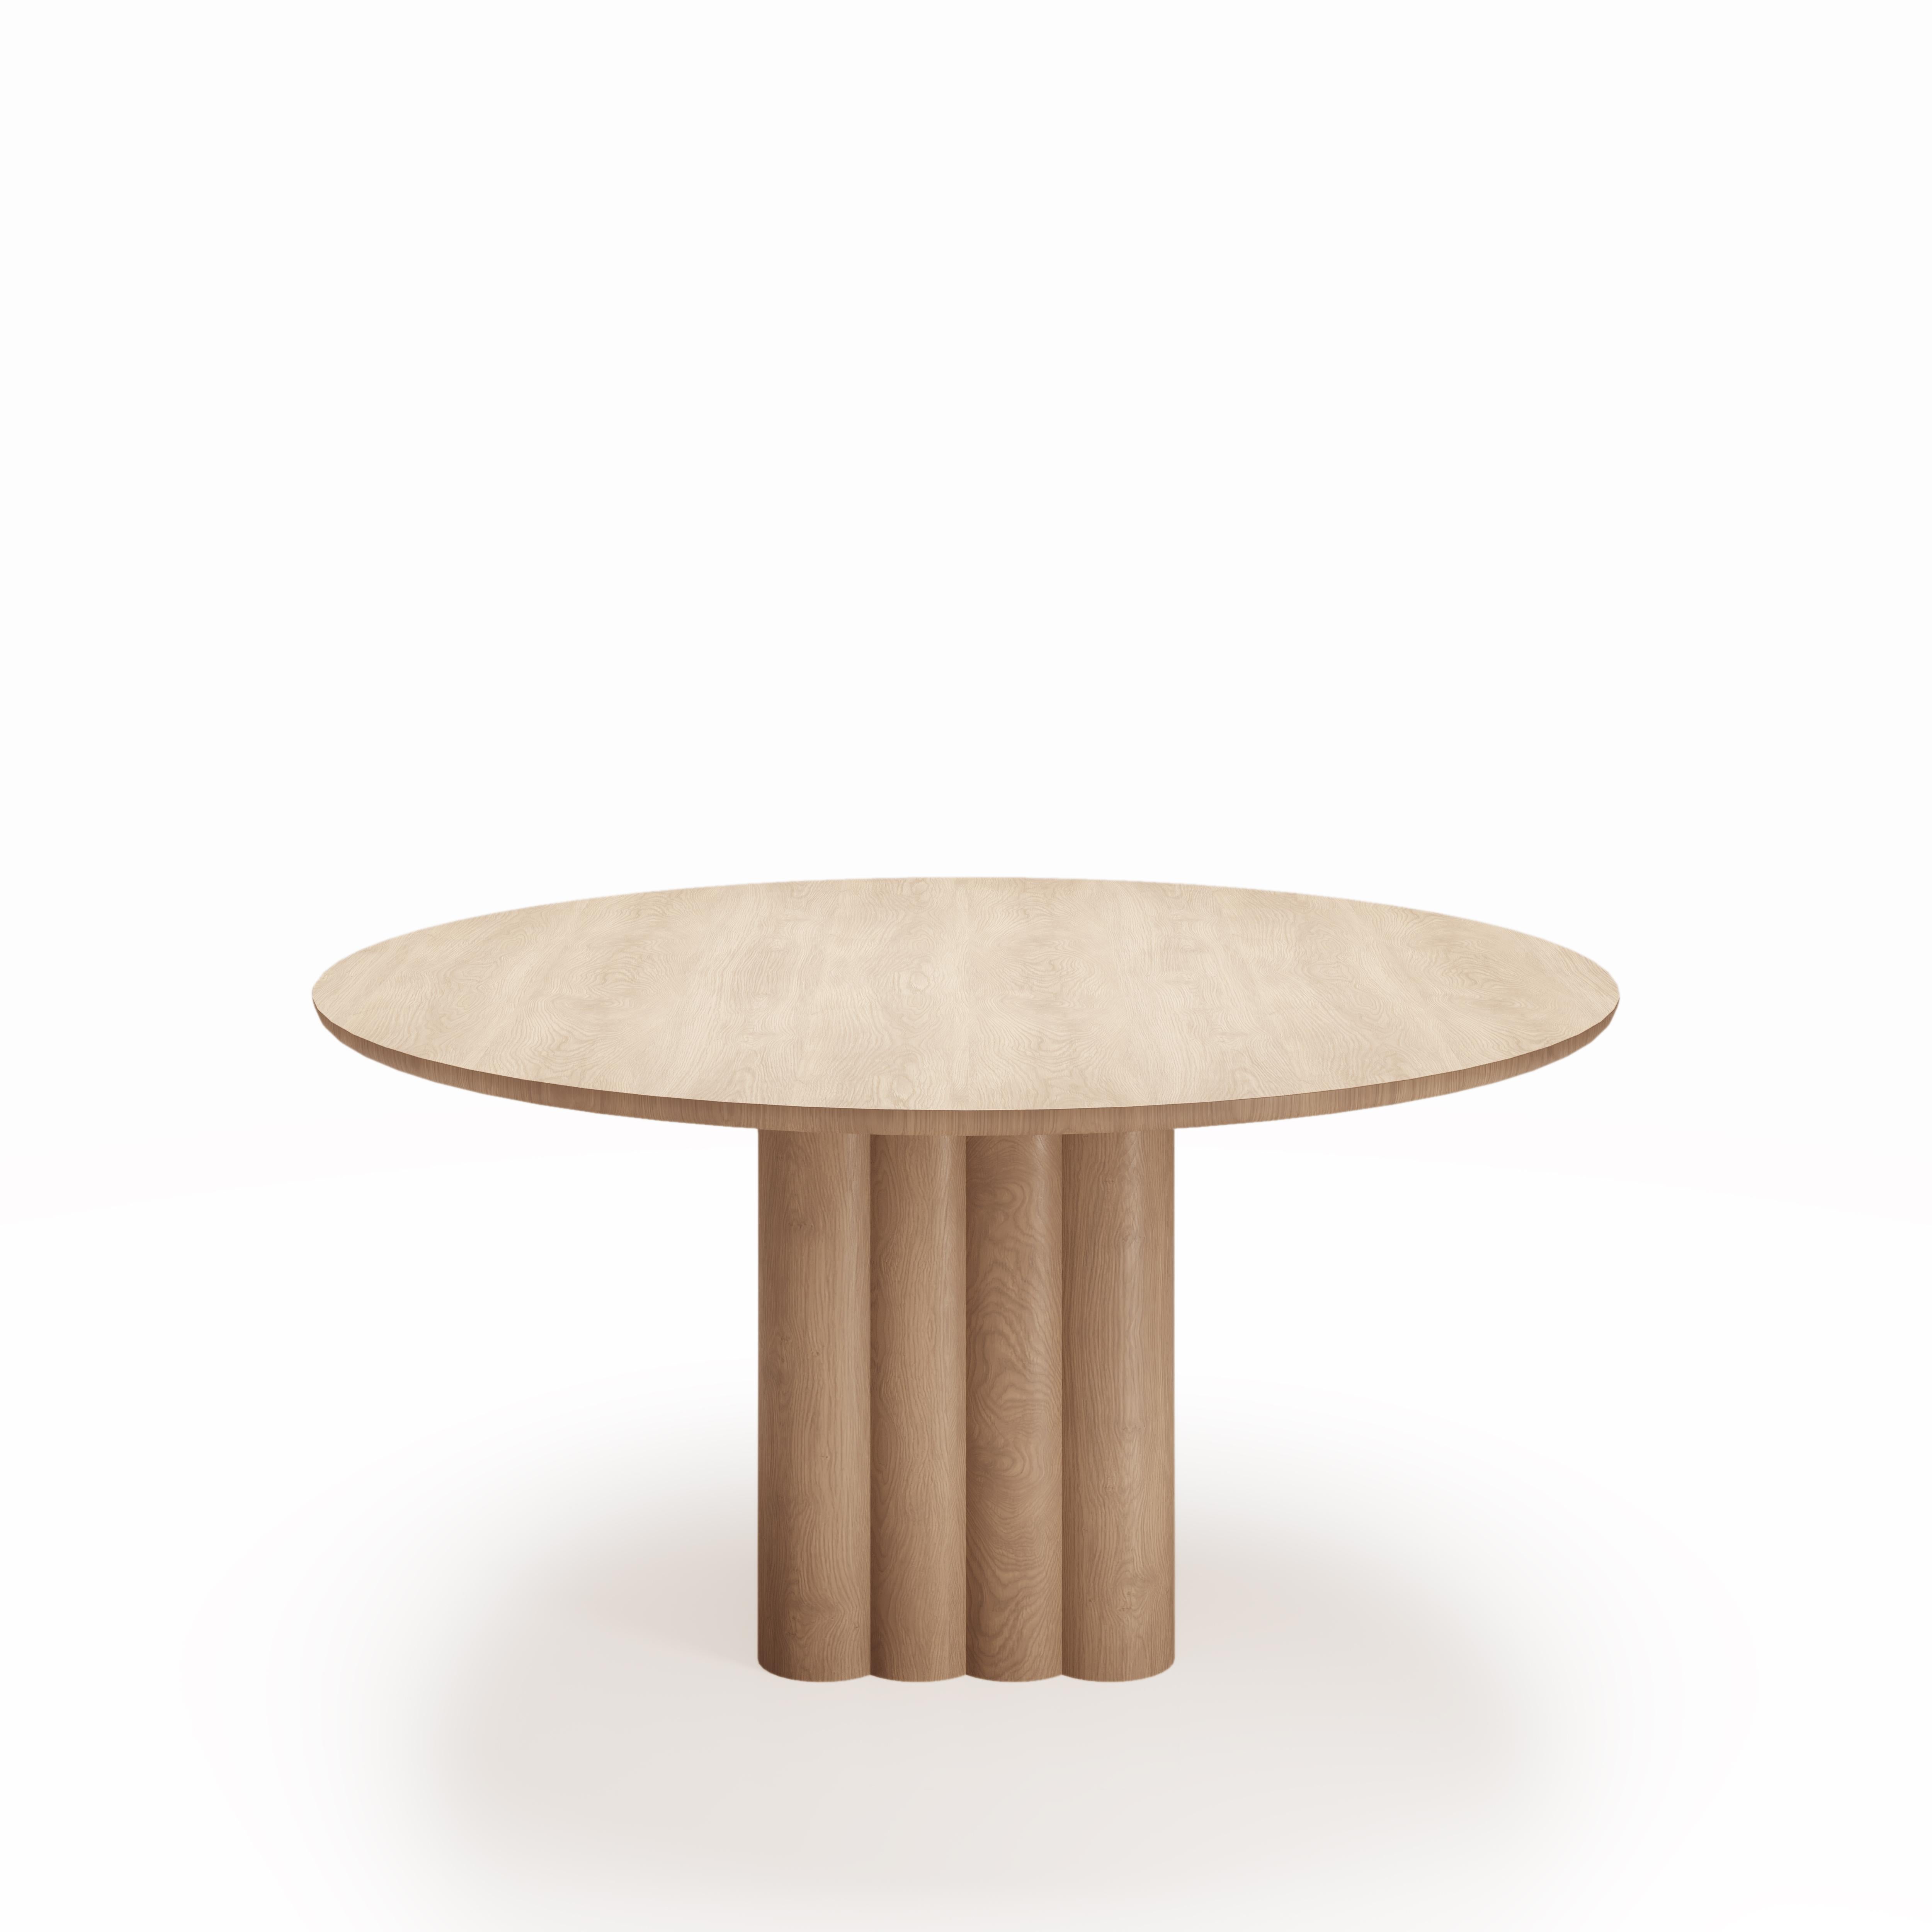 Round Dining Table 'Plush' by Dk3, Smoked Oak or Walnut, 150 cm For Sale 3